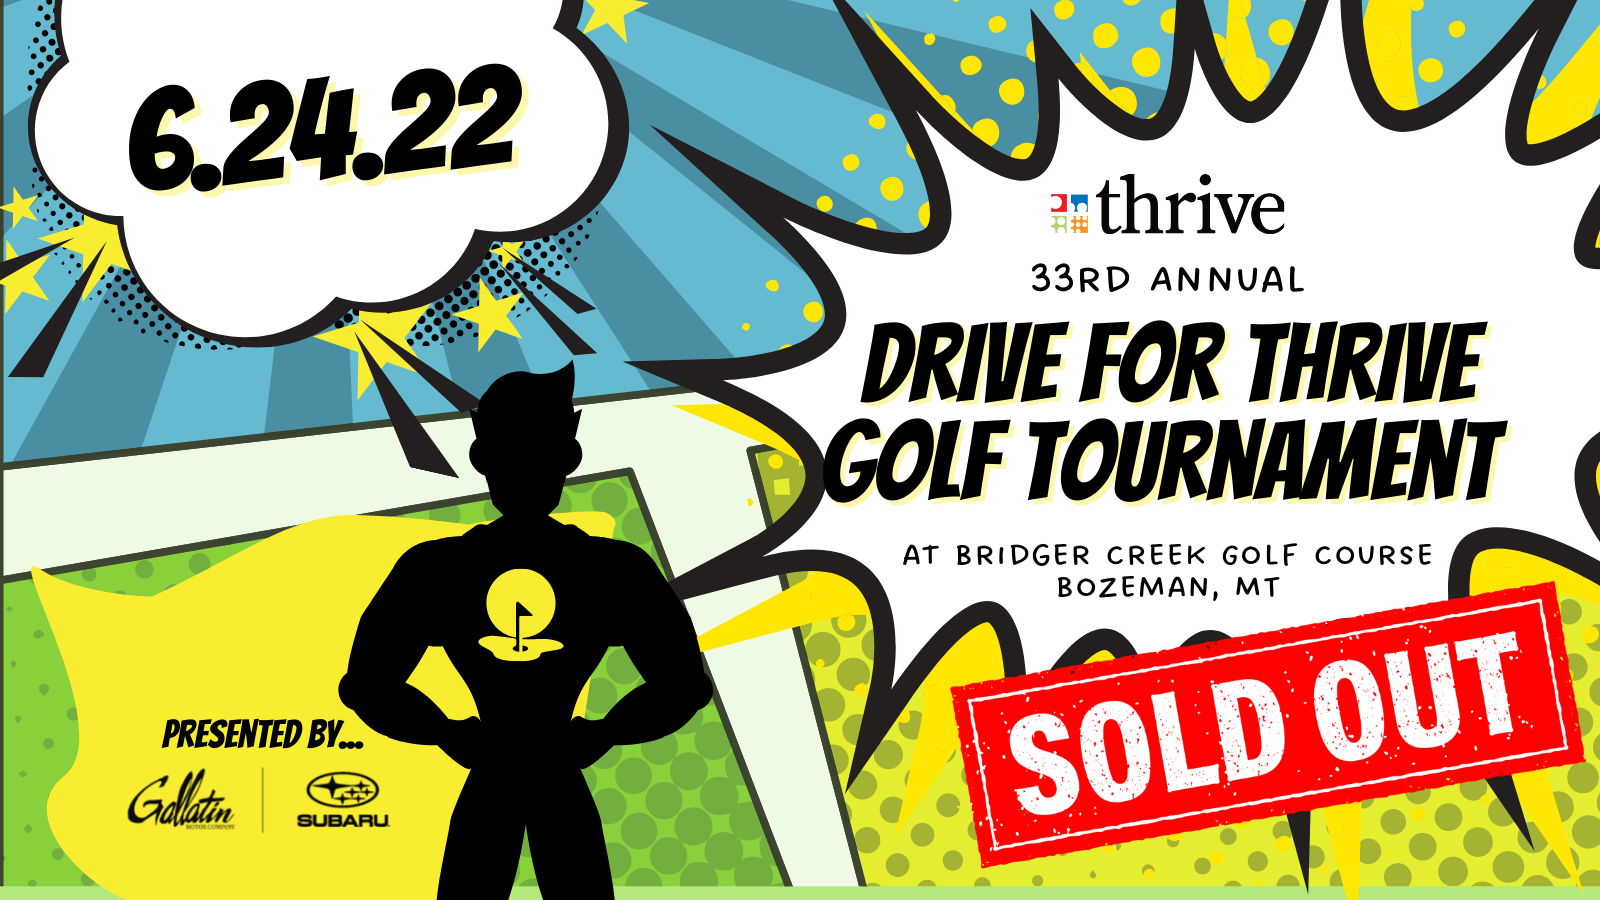 Drive for Thrive Golf Tournament at Bridger Creek Golf Course, 6.24.22, SOLD OUT